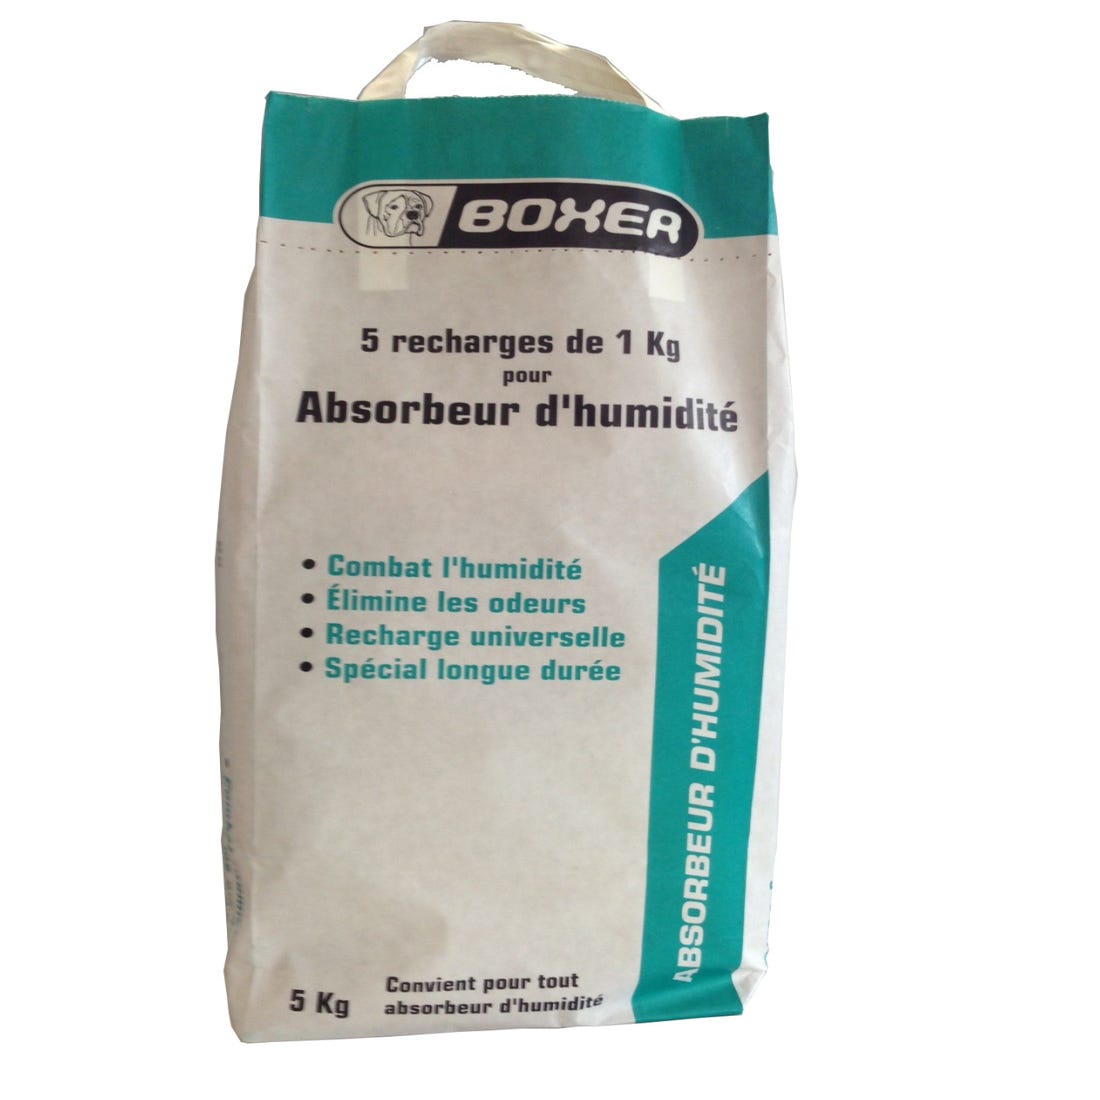 BOXER SAC 5 RECHARGES ABSORBEUR 5 X 1 KG